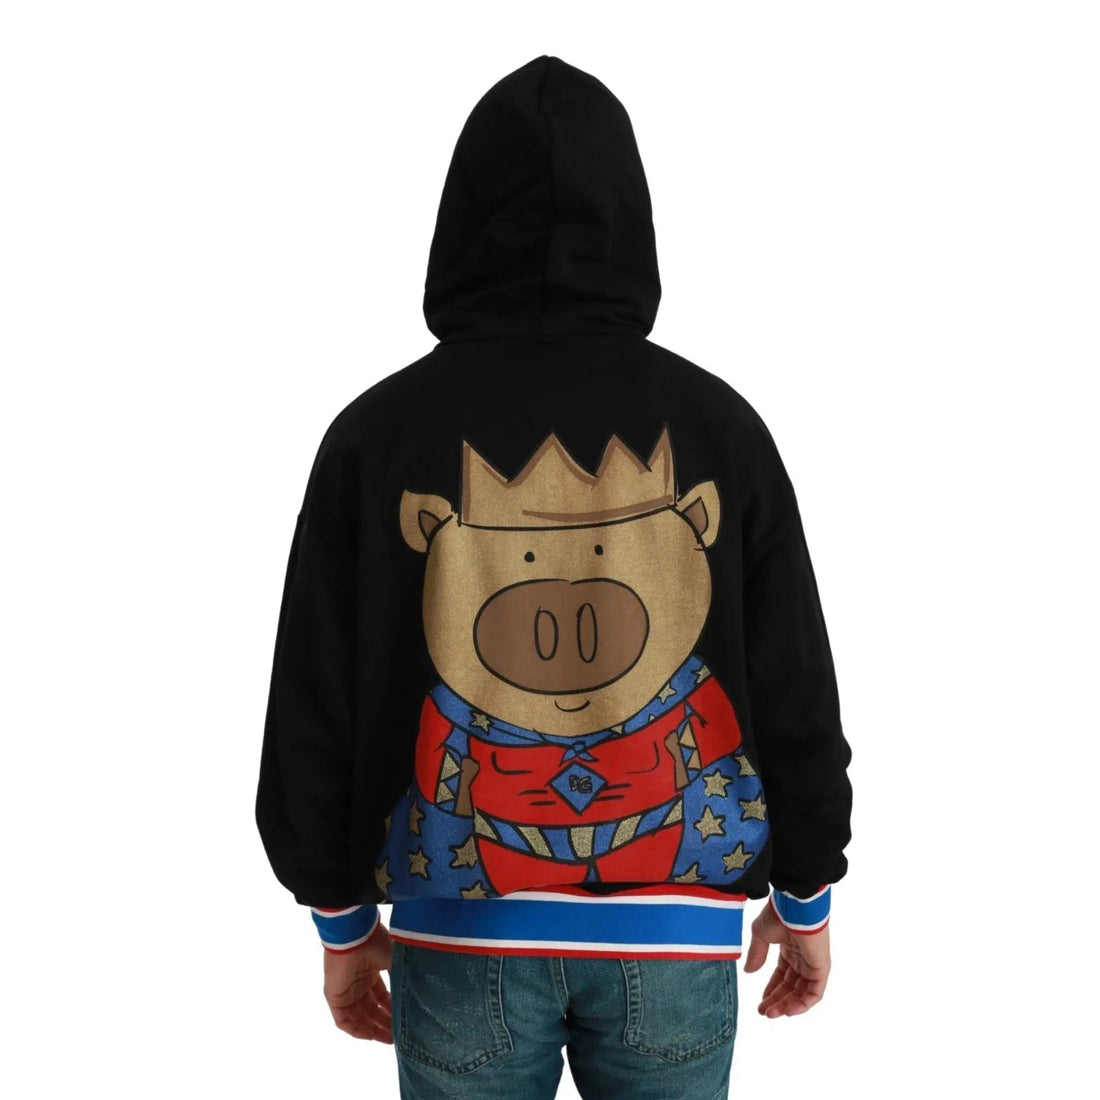 Dolce & Gabbana Black Sweater Pig of the Year Hooded